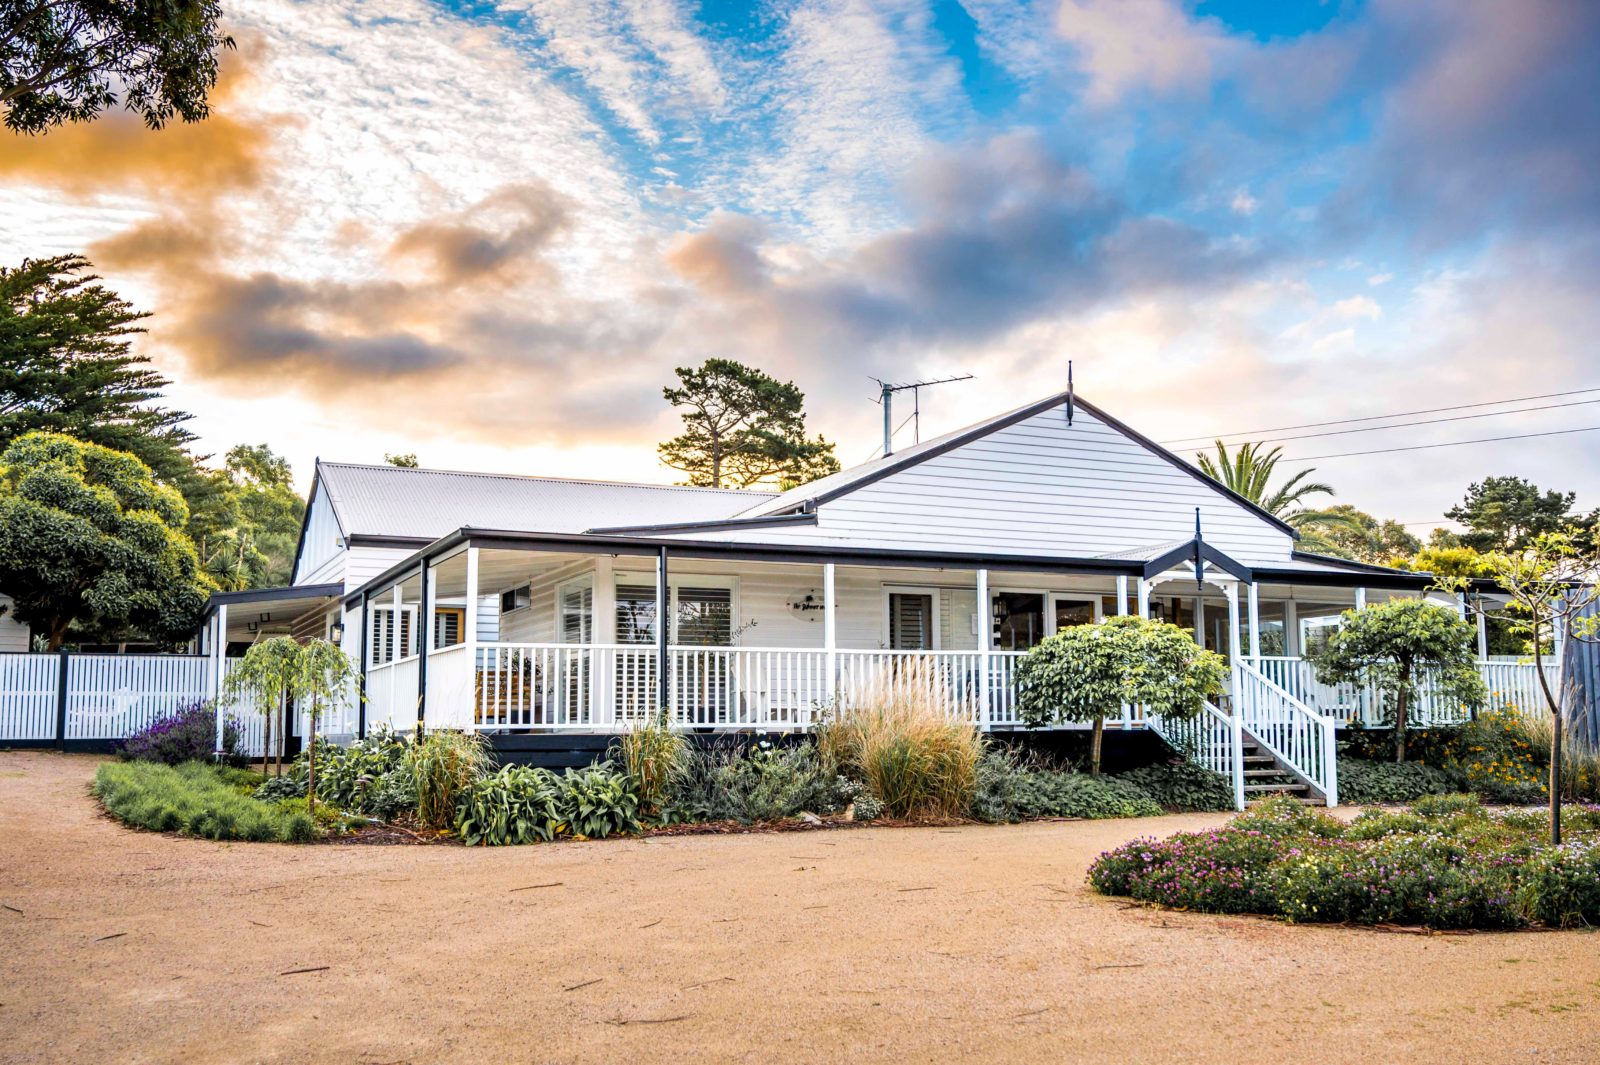 The Summer House is the second oldest home on the Surfcoast and has been recently restored